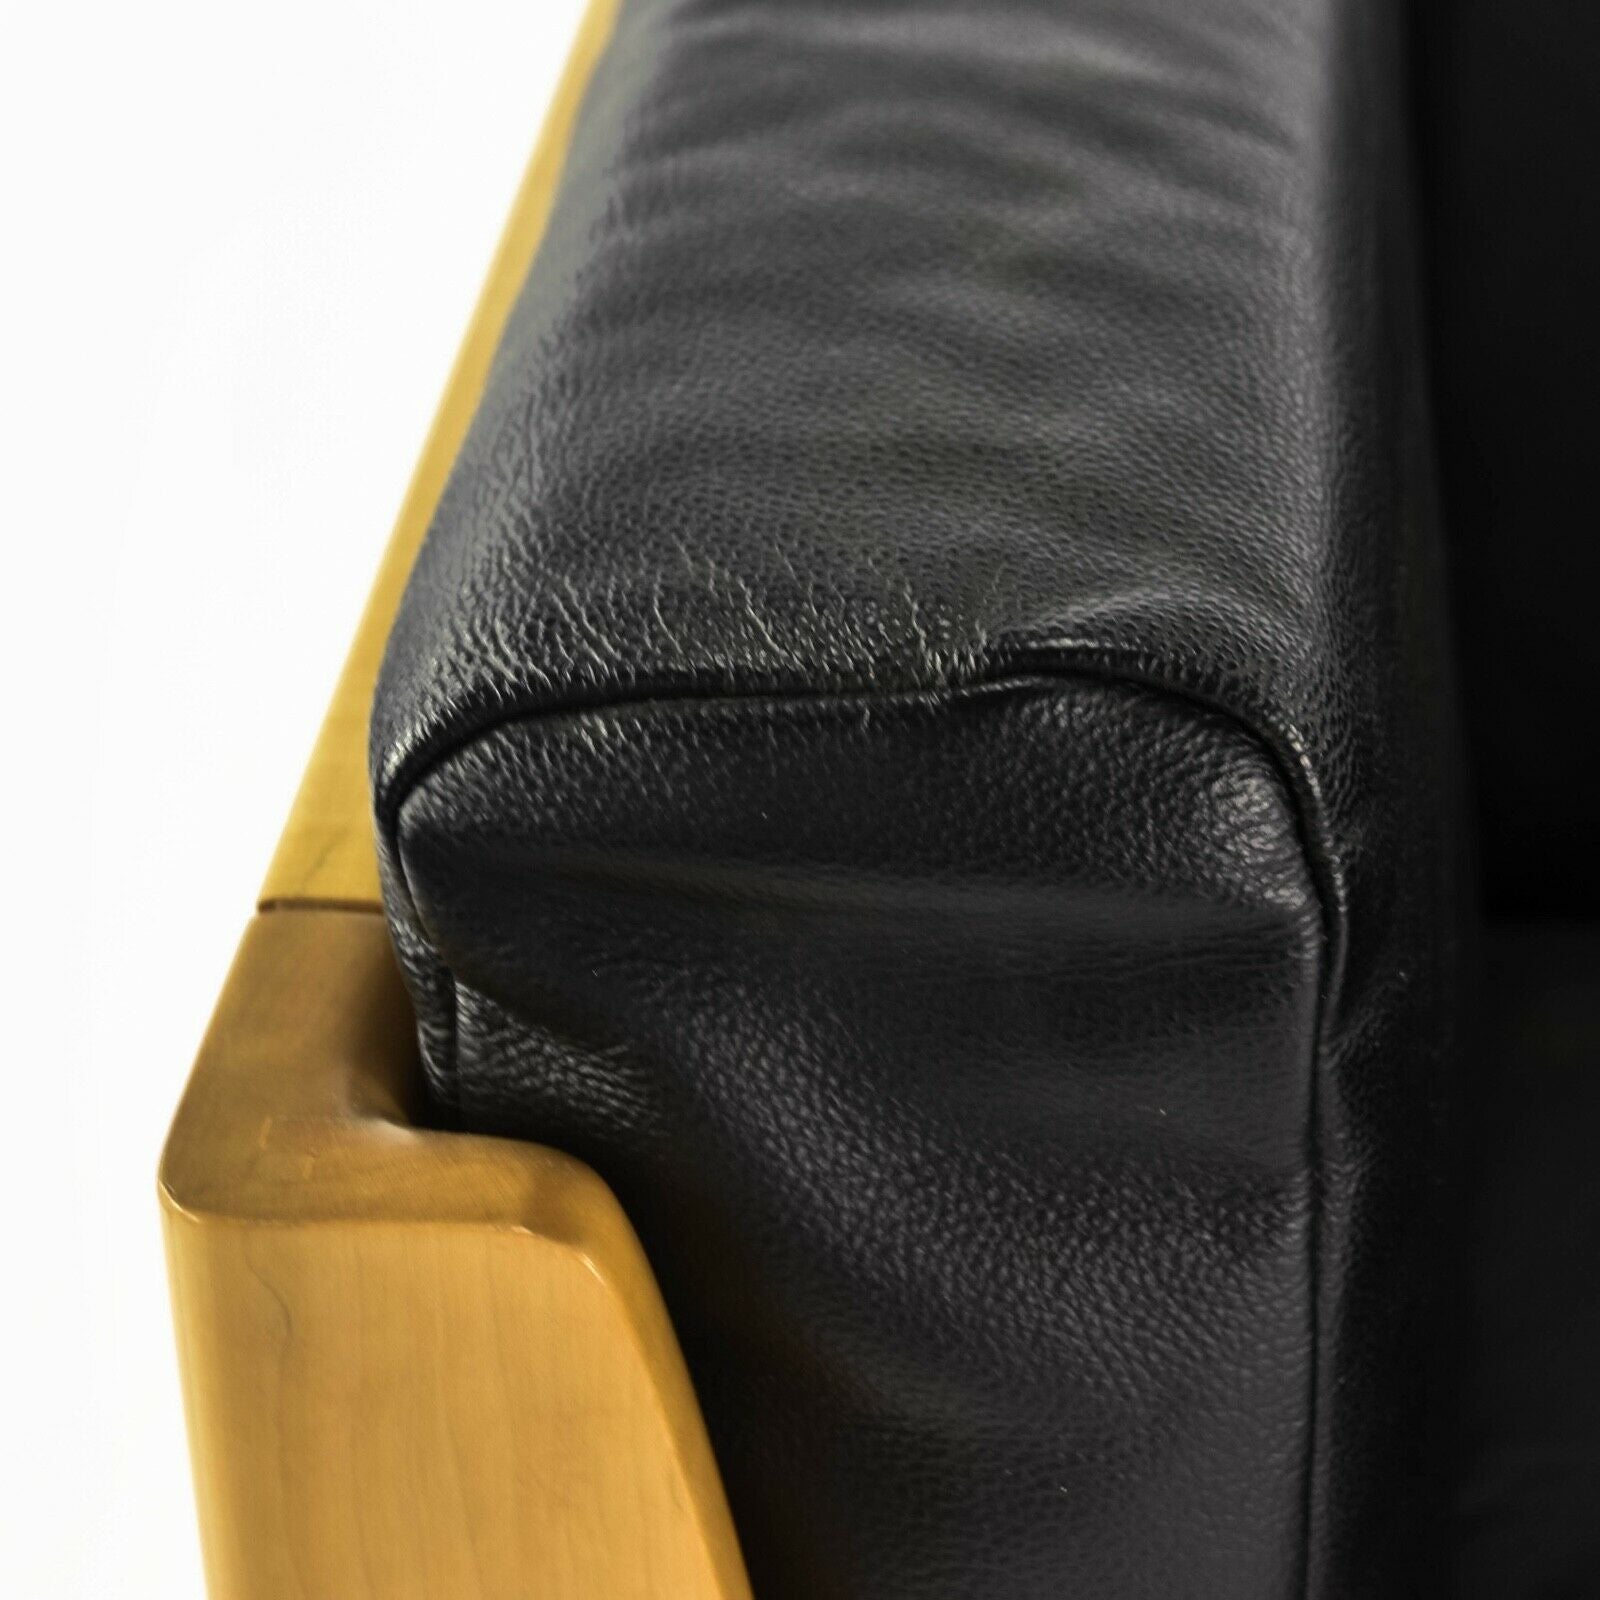 2001 Postmodern Club Chair in Maple and Black Leather by Brian Kane for Metropolitan Furniture